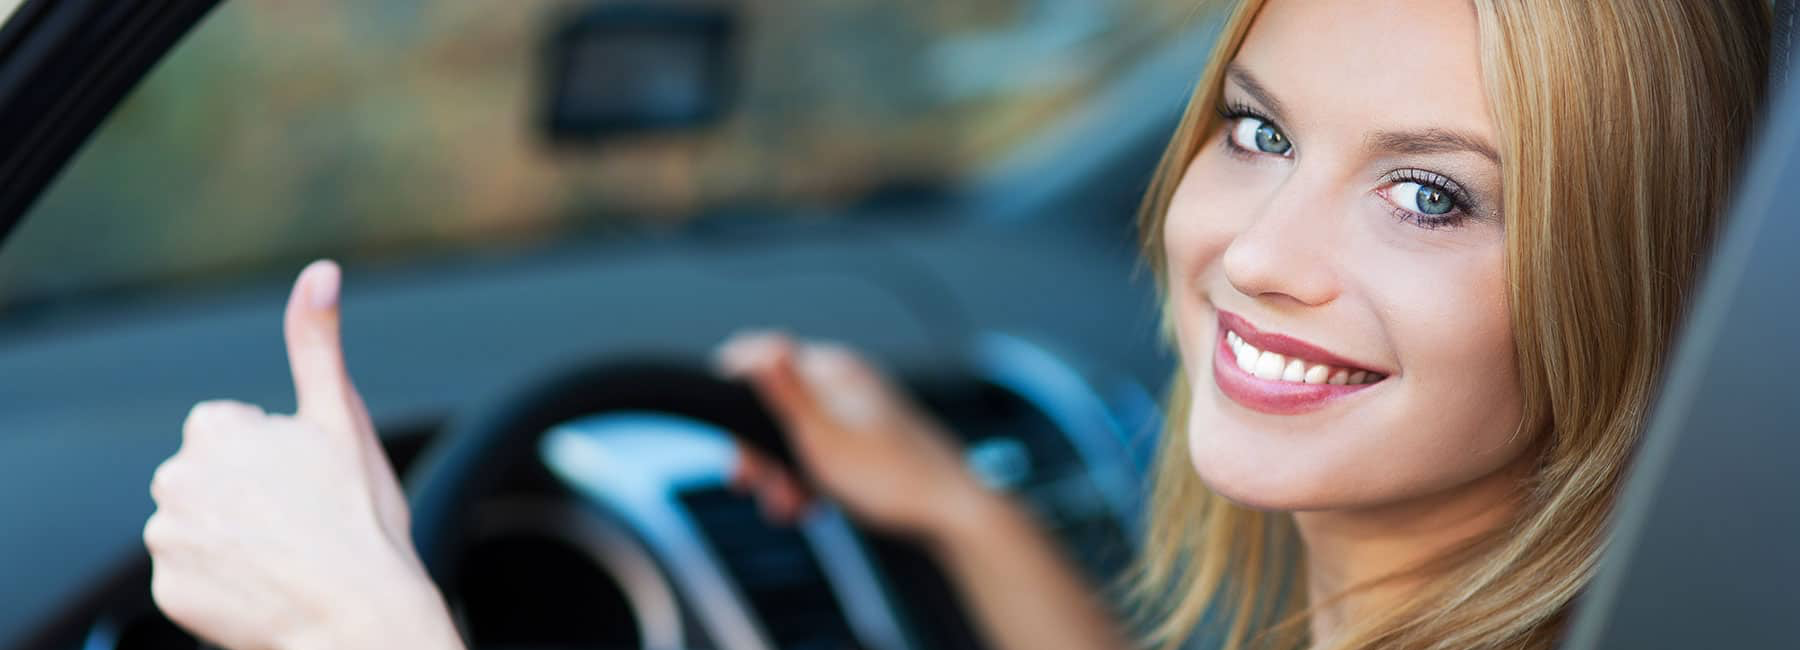 smiling woman in car gives thumbs up